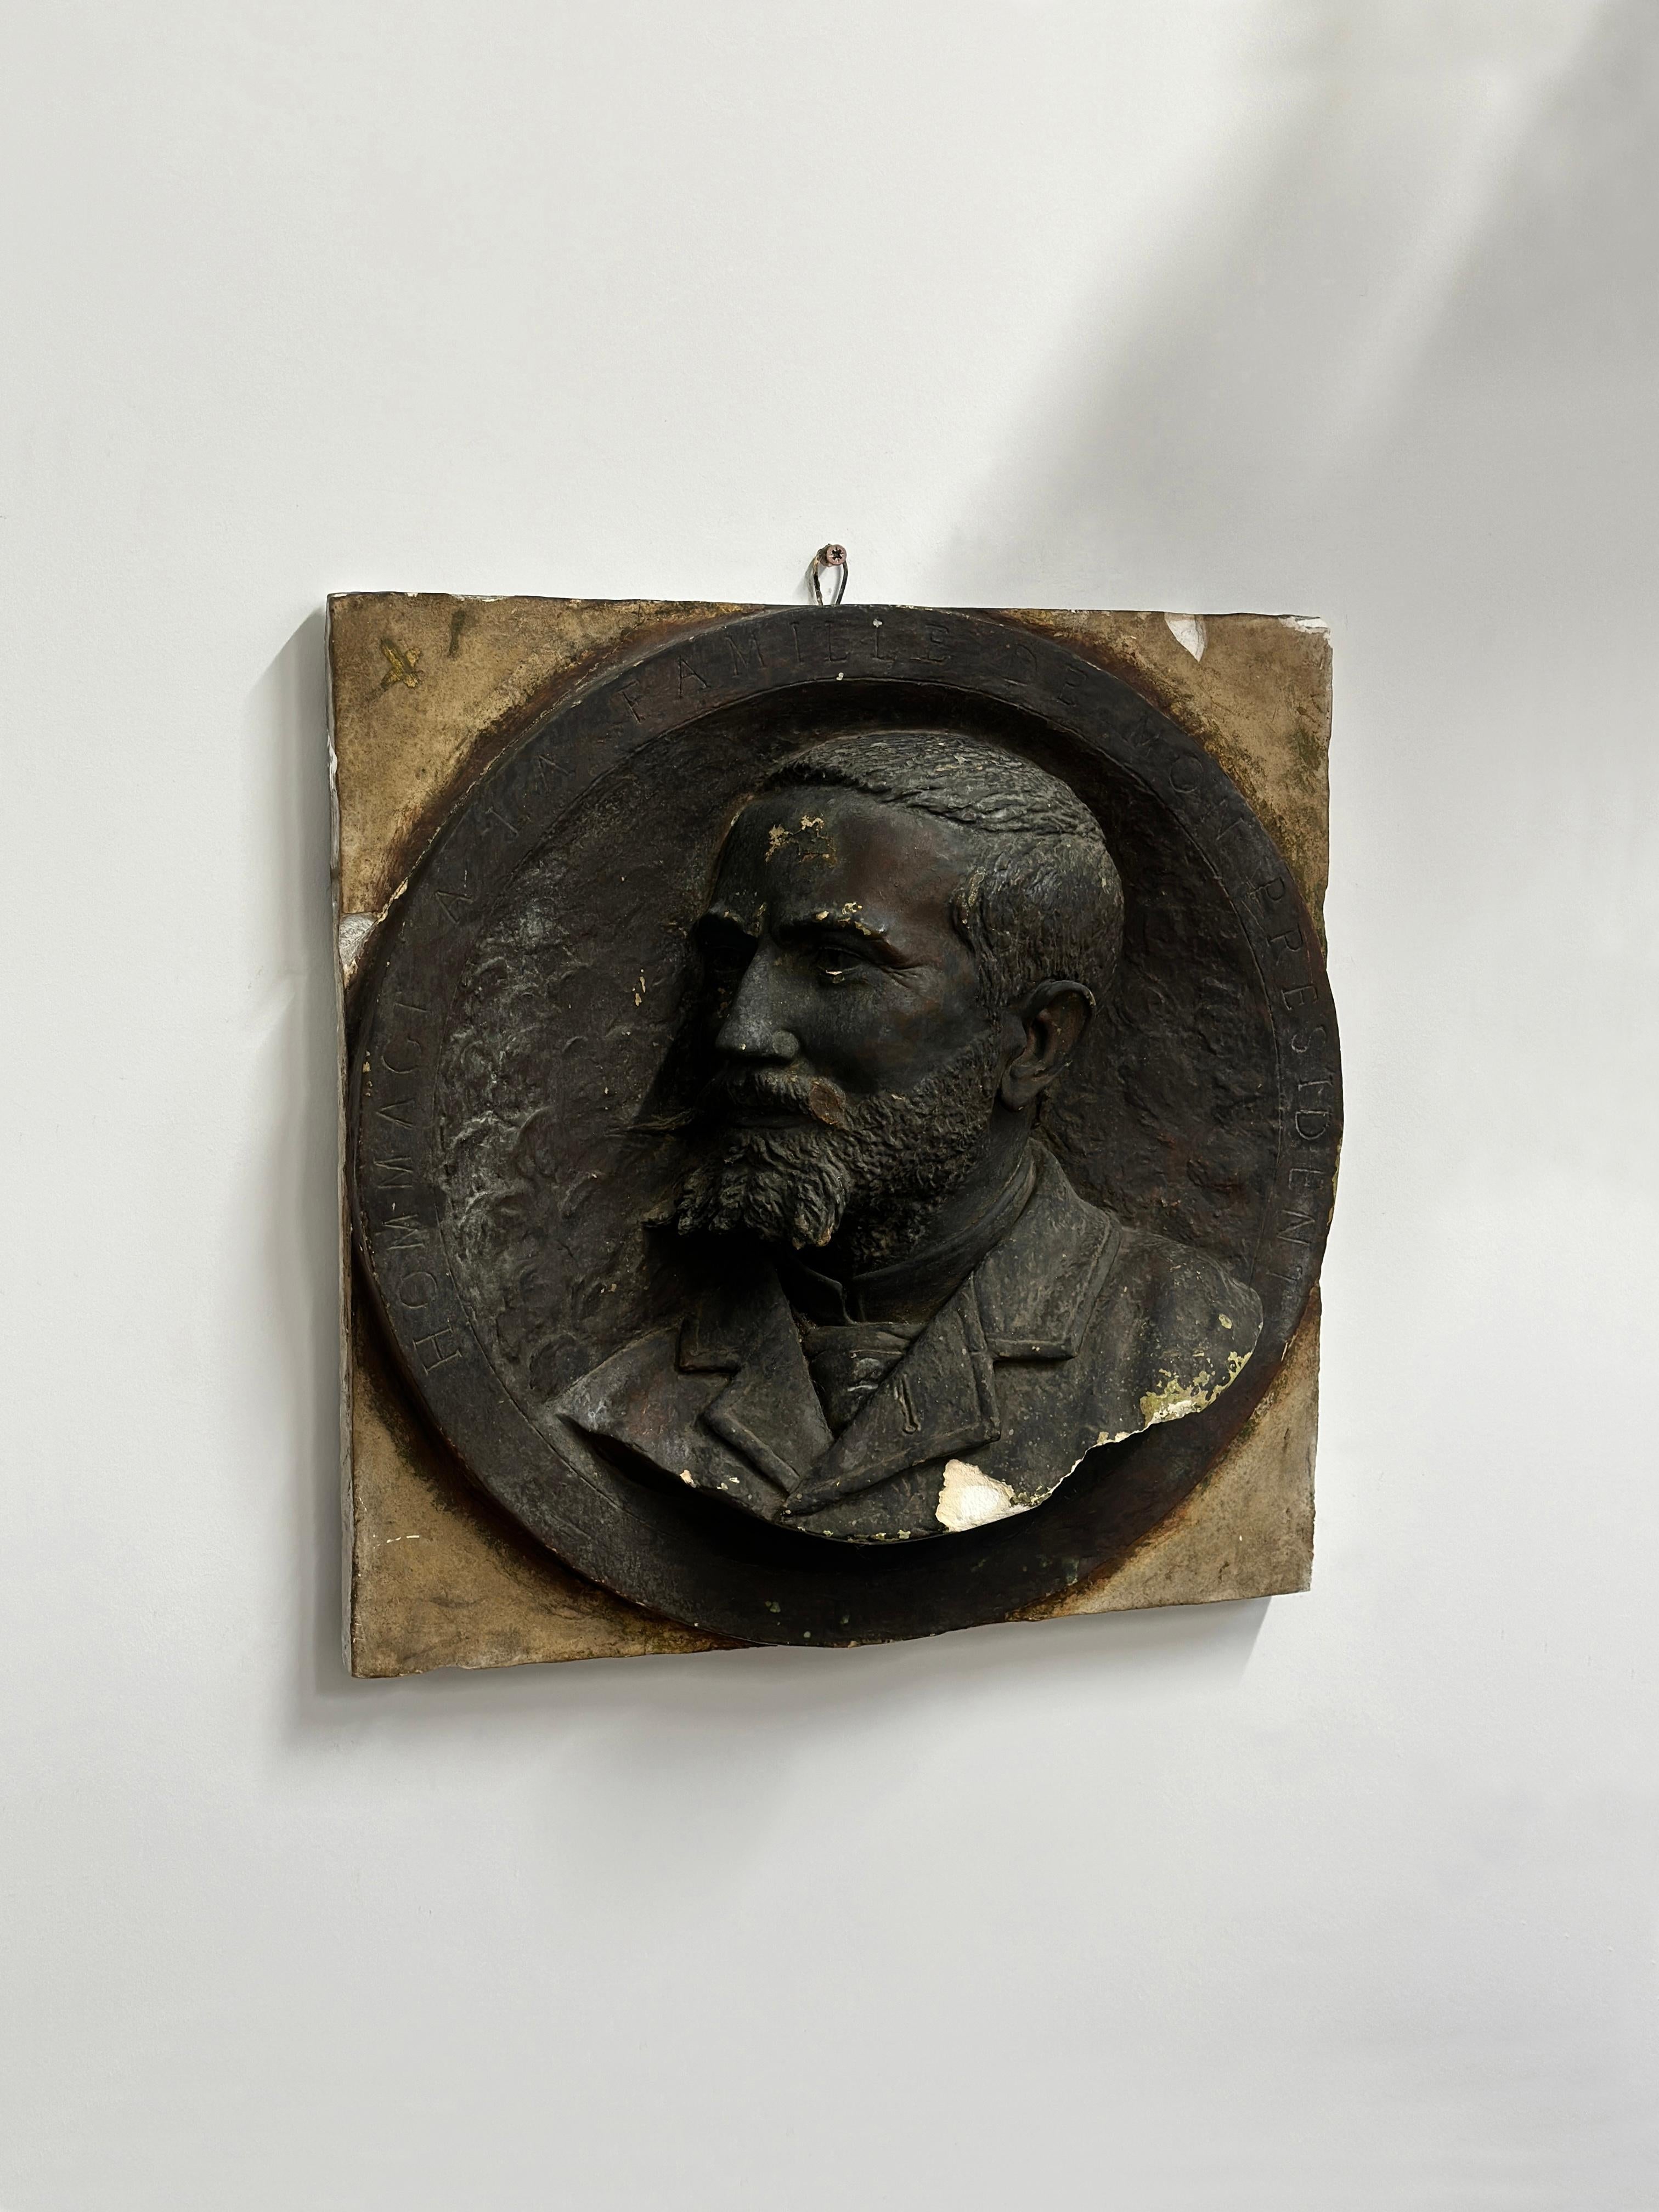 Antique Vintage 19th Century Plaster Wall Bust Of A Bearded Man With Inscription In Fair Condition For Sale In Sale, GB